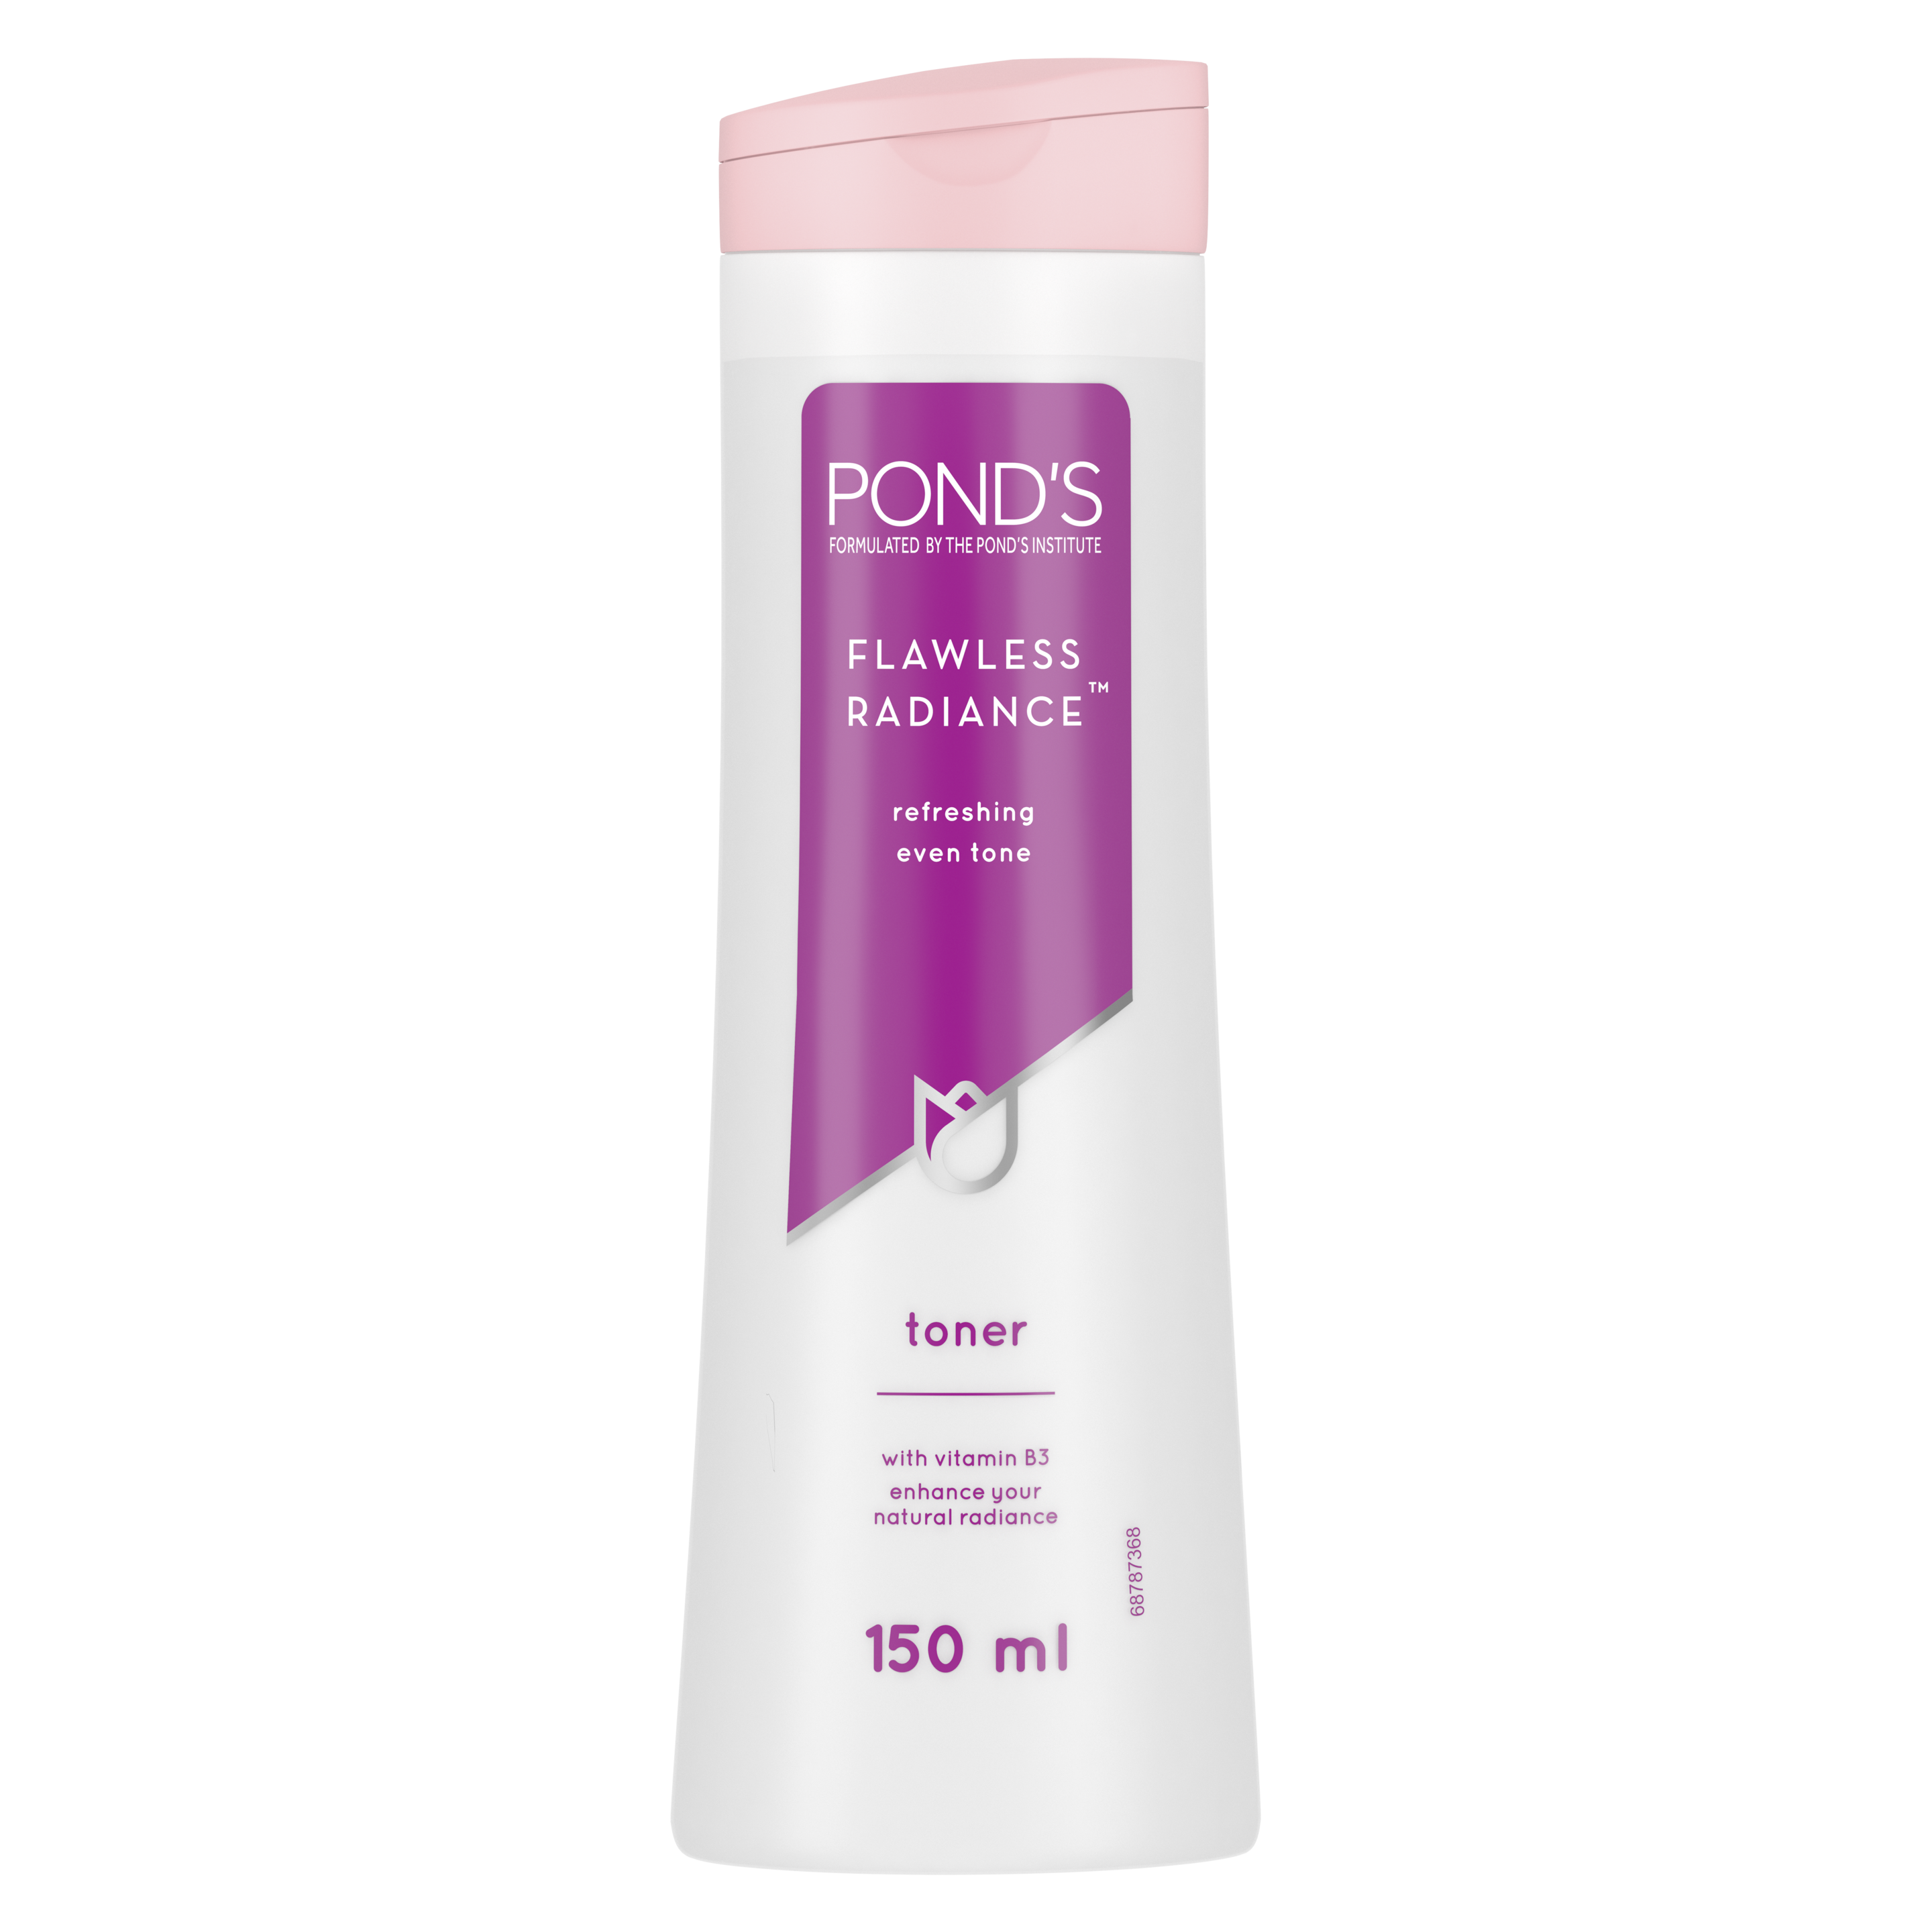 POND'S Flawless Radiance Even Tone Facial Toner